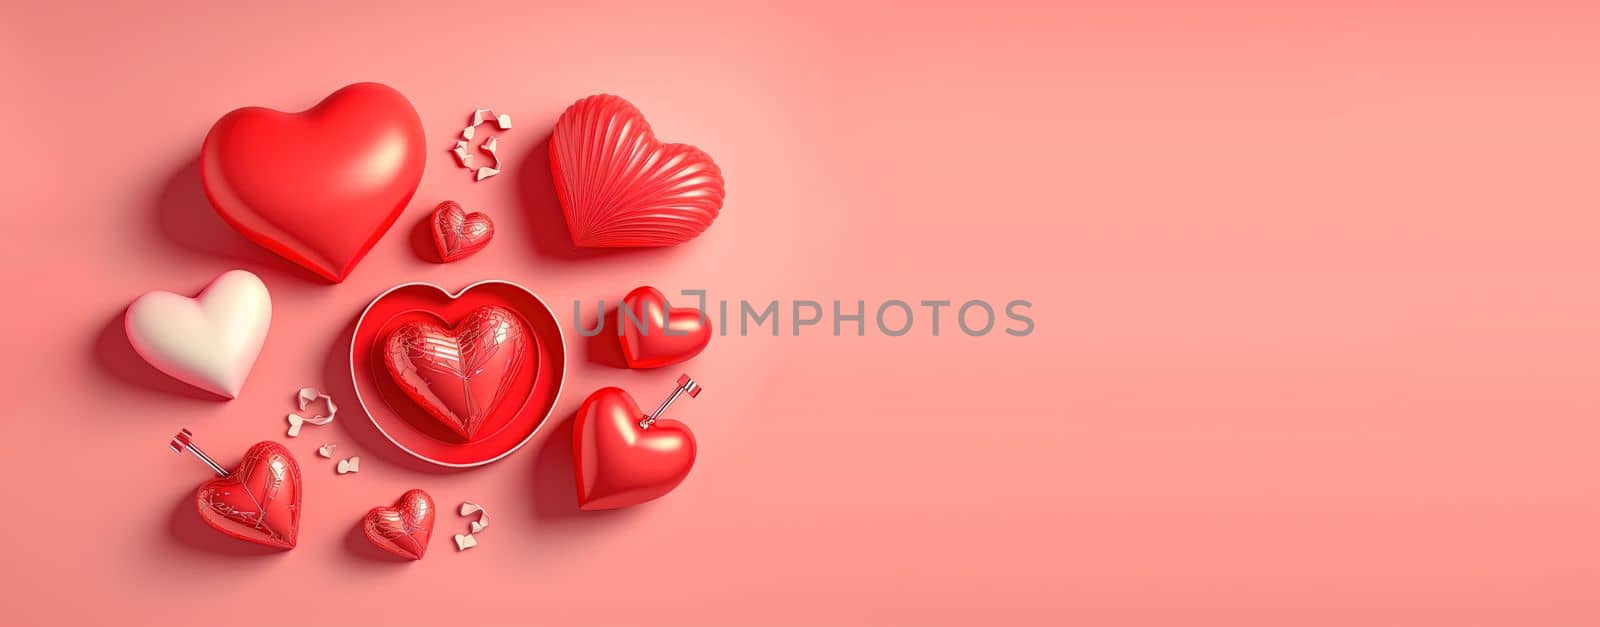 Happy Valentine's Day banner featuring a glossy red heart shape